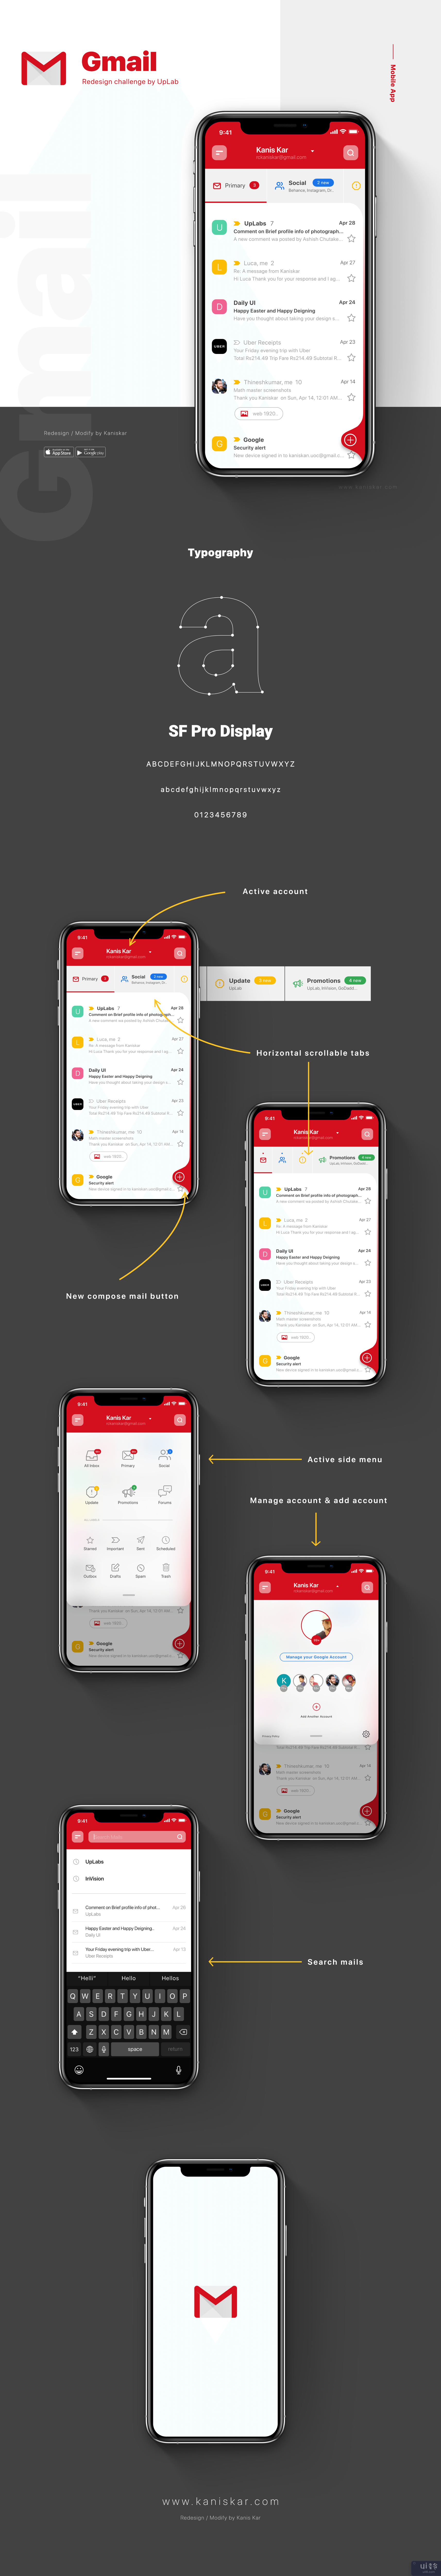 Gmail 电子邮件客户端重新设计 - UI/UX 工具包(Gmail e-mail client Redesign  - UI/UX Kit)插图